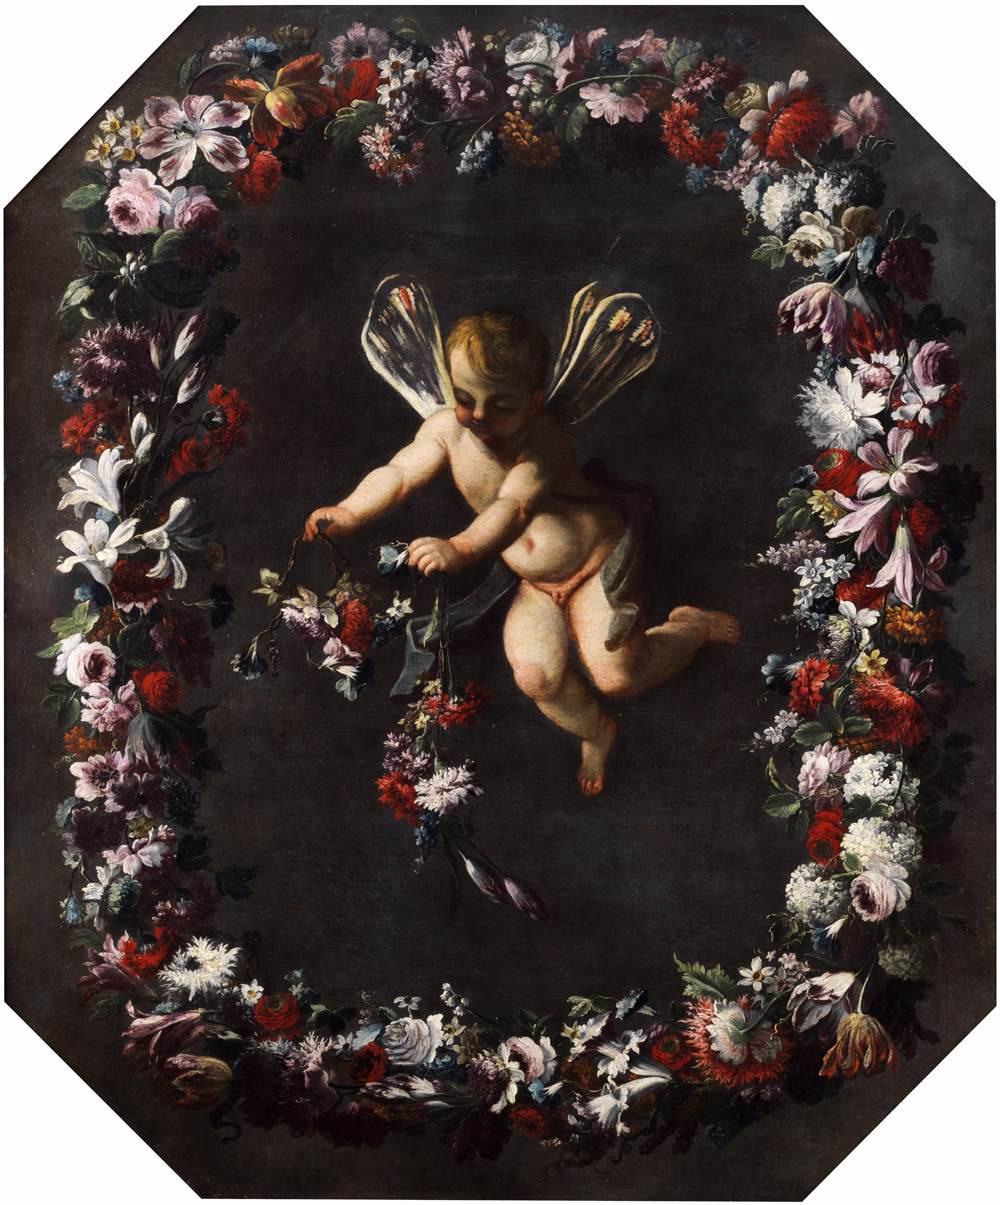 Putto with Dragonfly Wings in a Garland